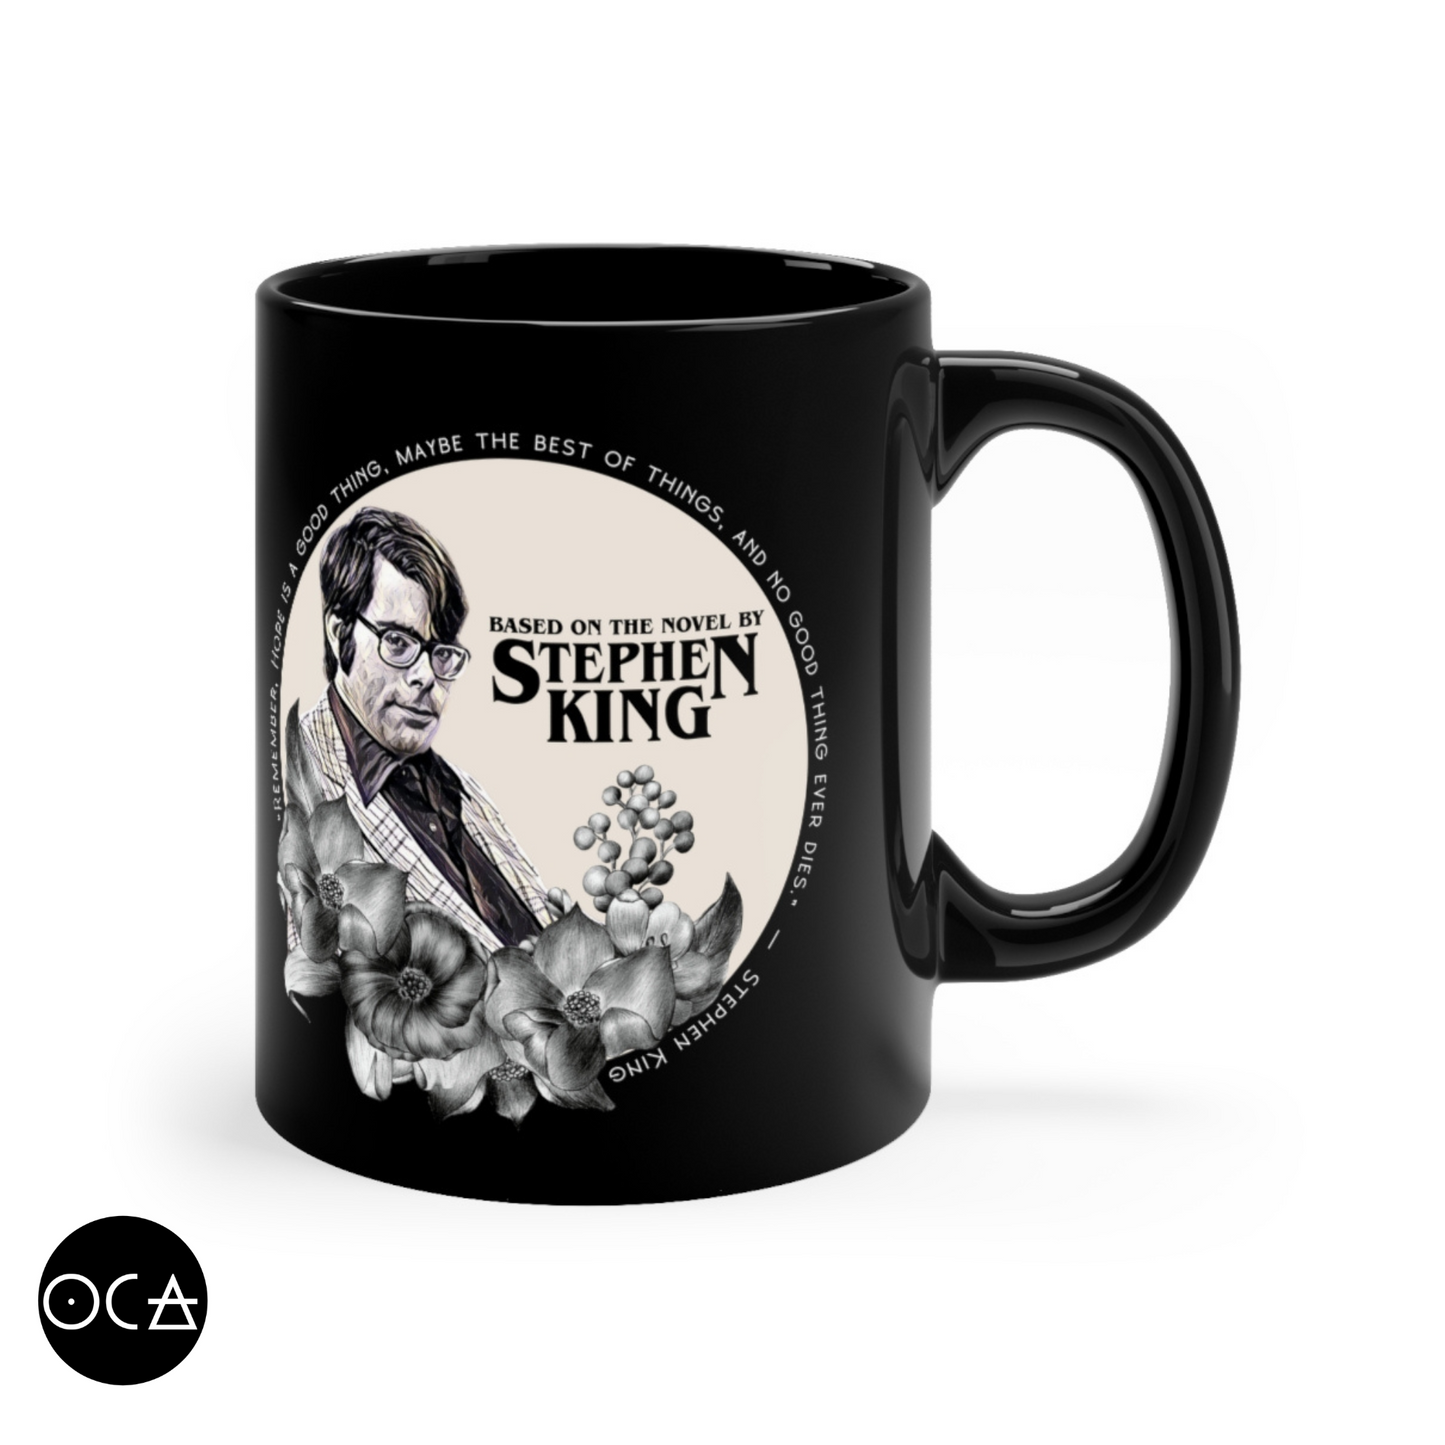 Stephen King Mug (Doublesided/2 Color Options) Herbteller Lucky Mugs | Gifts for Writers, Readers and Taleswappers